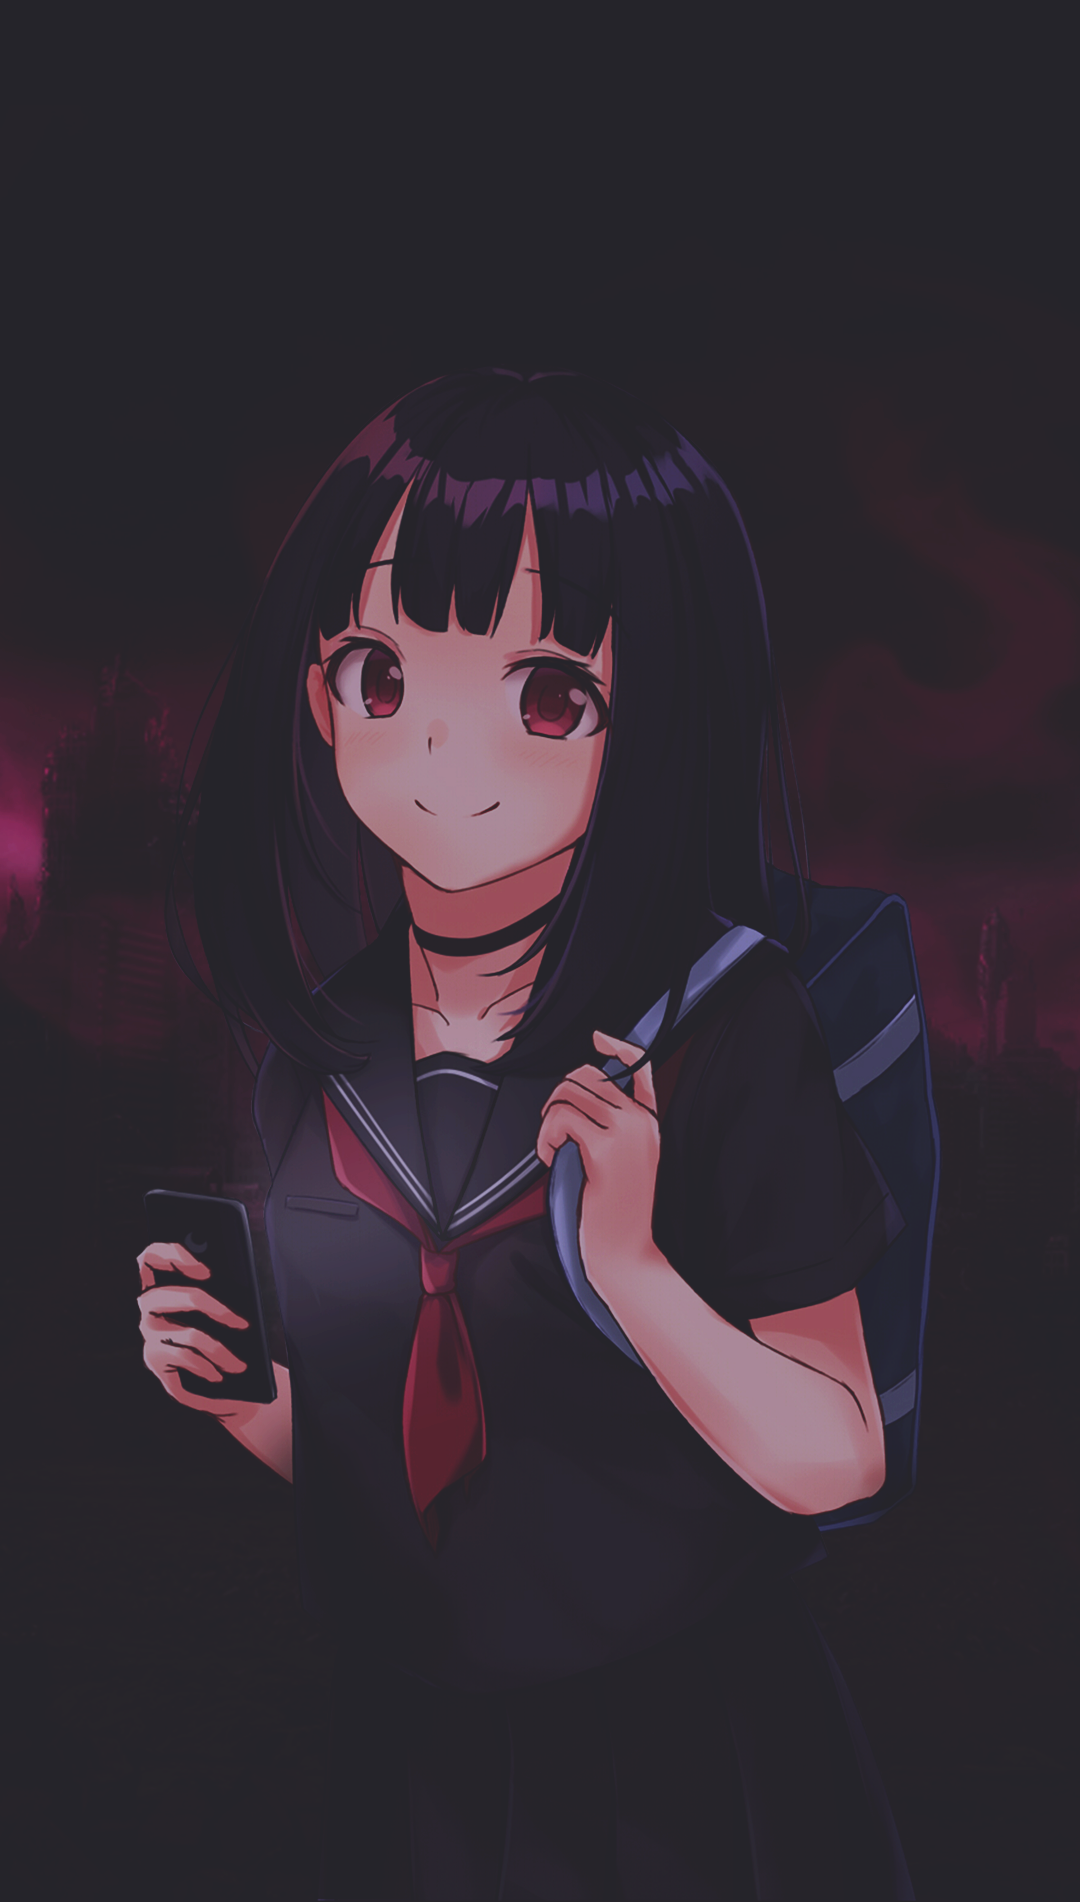 Anime 1080x1902 anime anime girls picture-in-picture dark smartphone tie red eyes